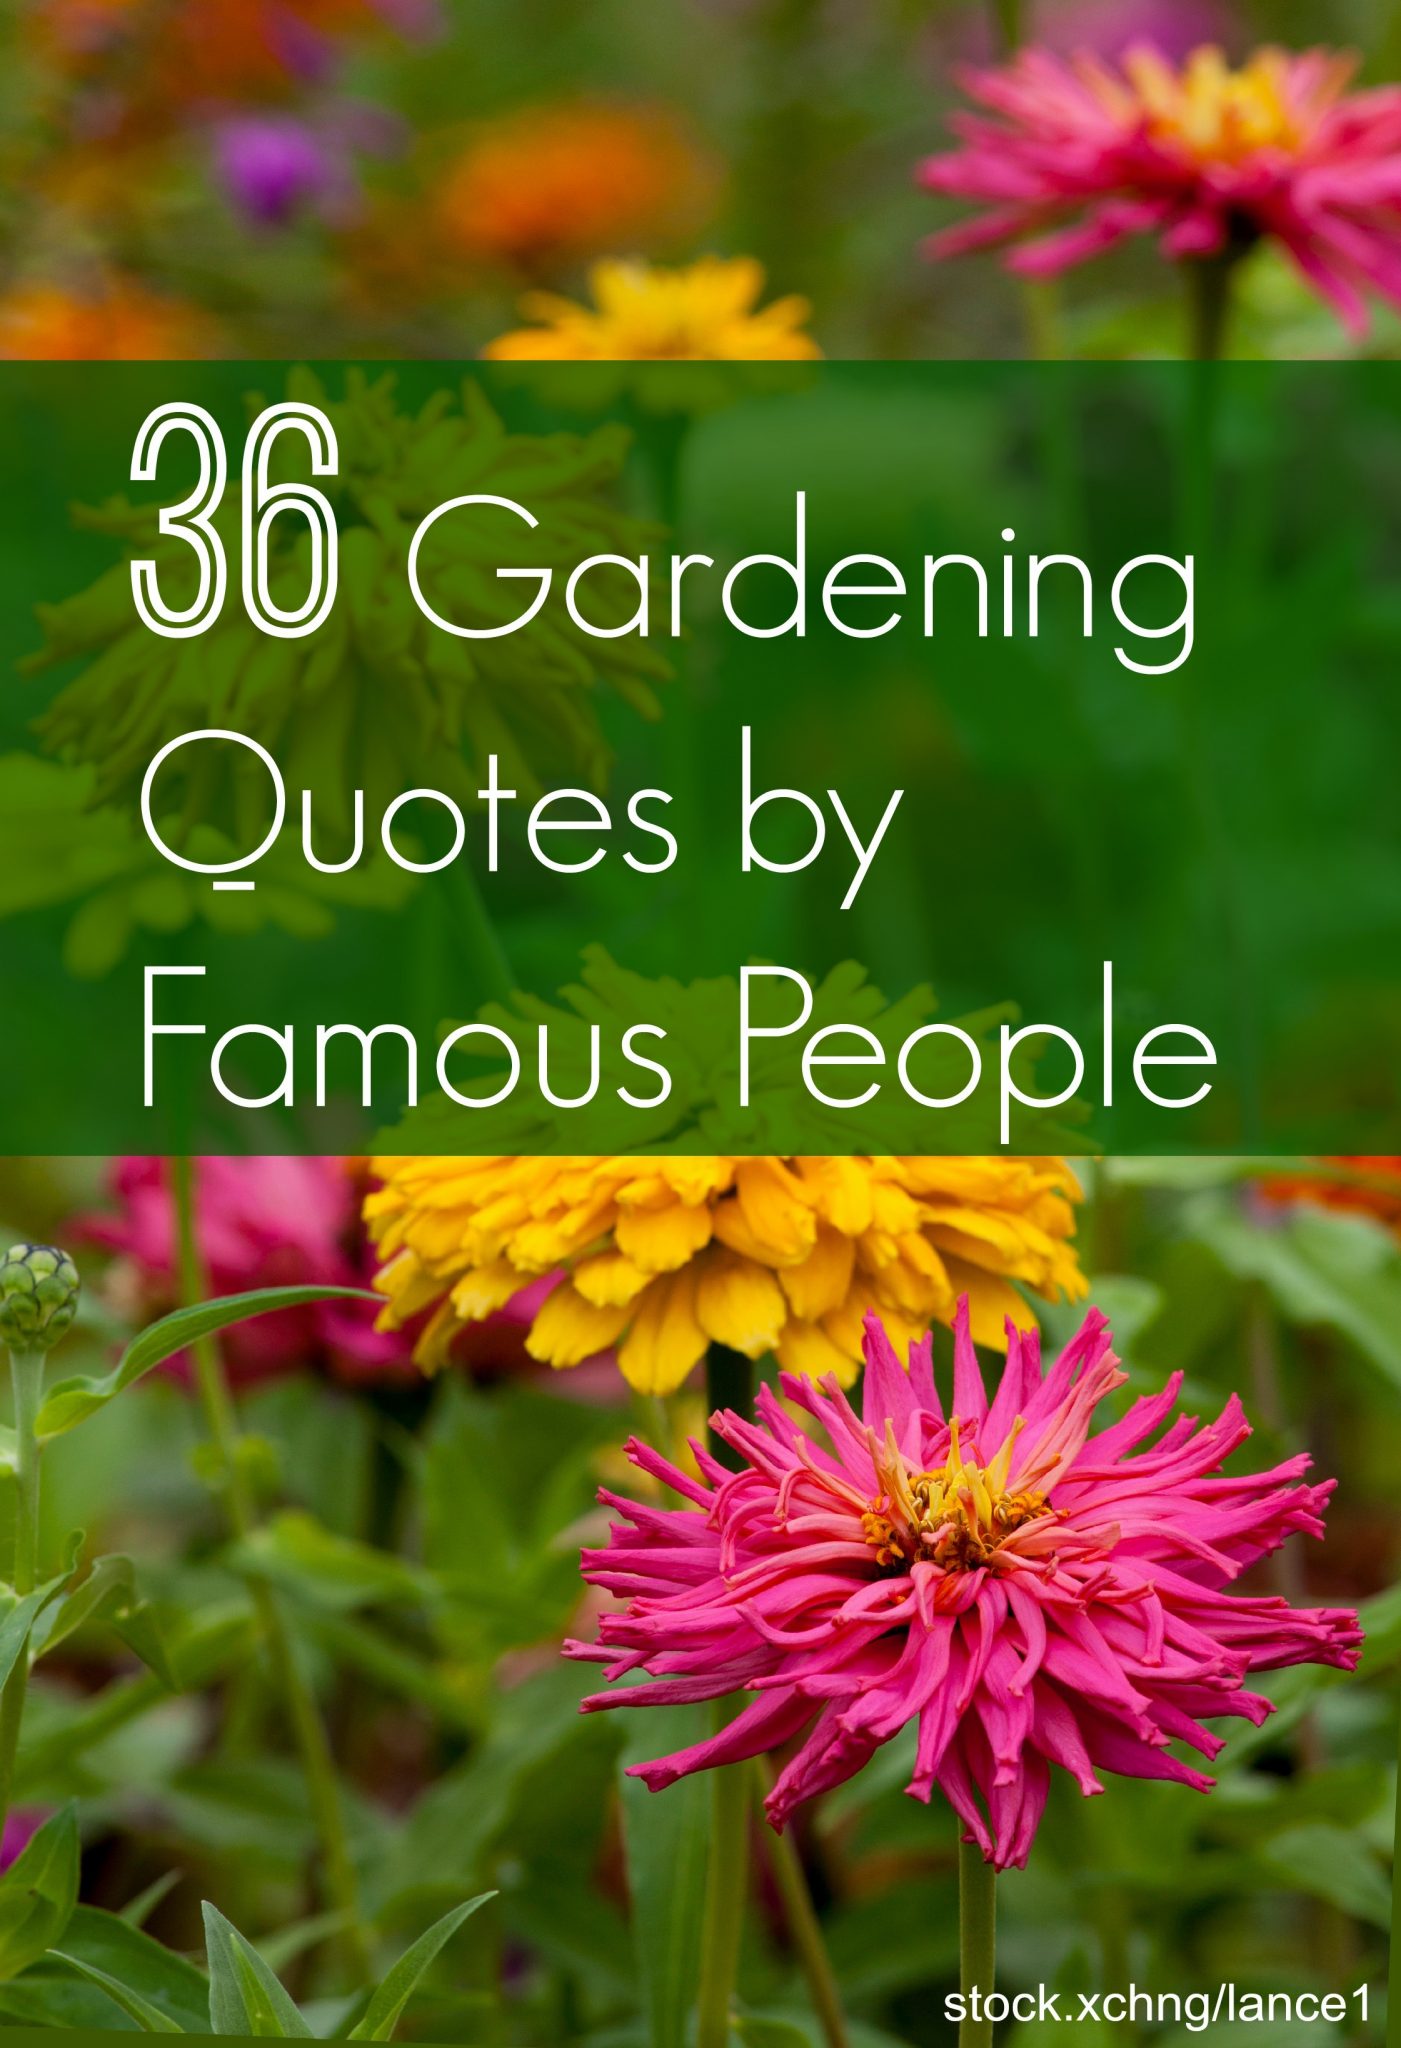 Garden Quotes: Best Gardening Quotes by Famous People | INSTALL-IT-DIRECT